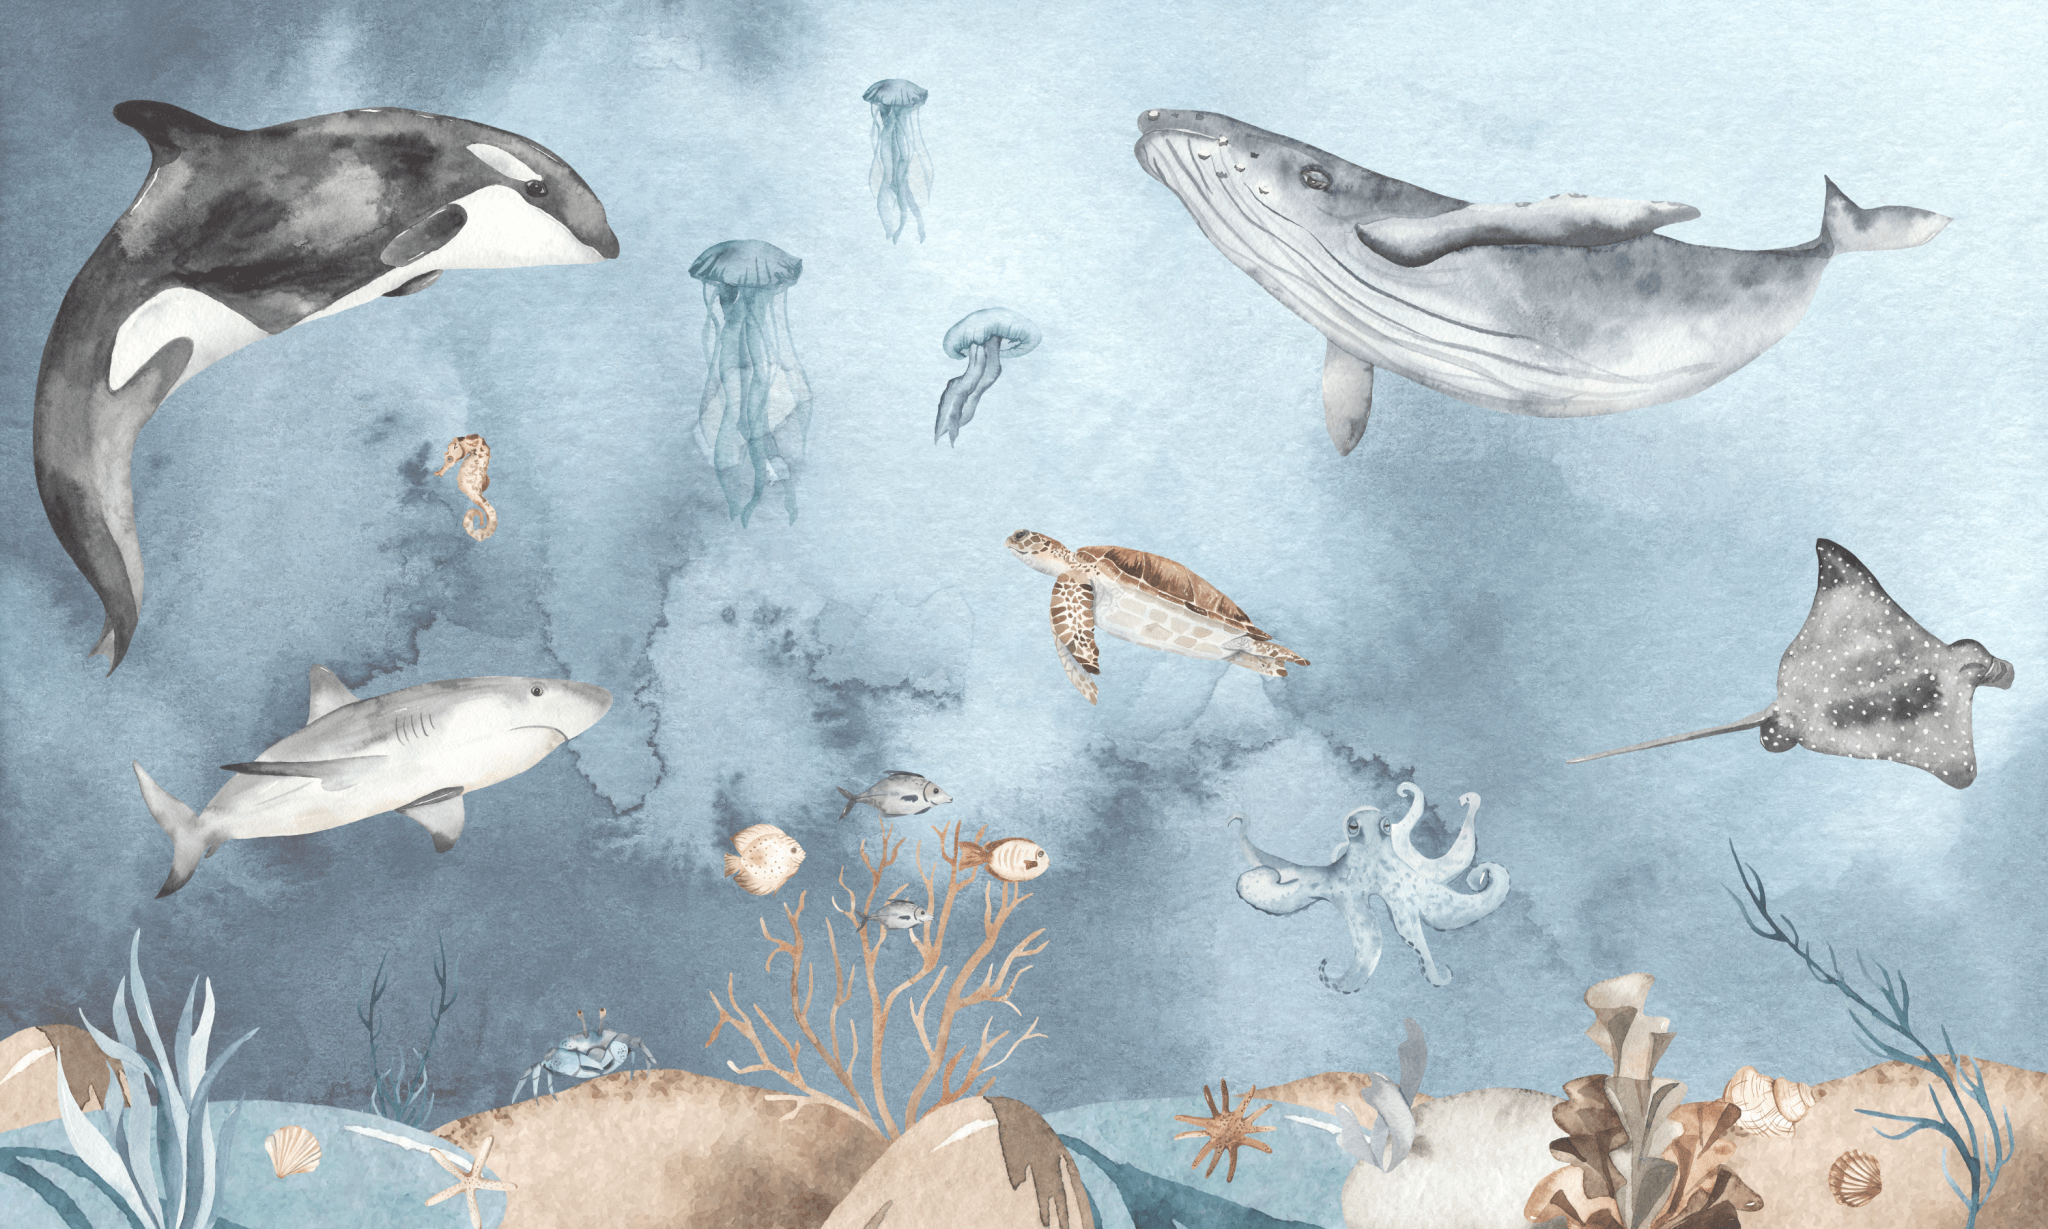 Ocean mural wallpaper designed for a child's room or nursery, showing a detailed and realistic sea life scene with creatures like orcas, whales, rays, and jellyfish, all set against a tranquil blue watercolor background. The mural offers a serene underwater world, perfect for a coastal-inspired kids' bedroom or a marine-themed play space.